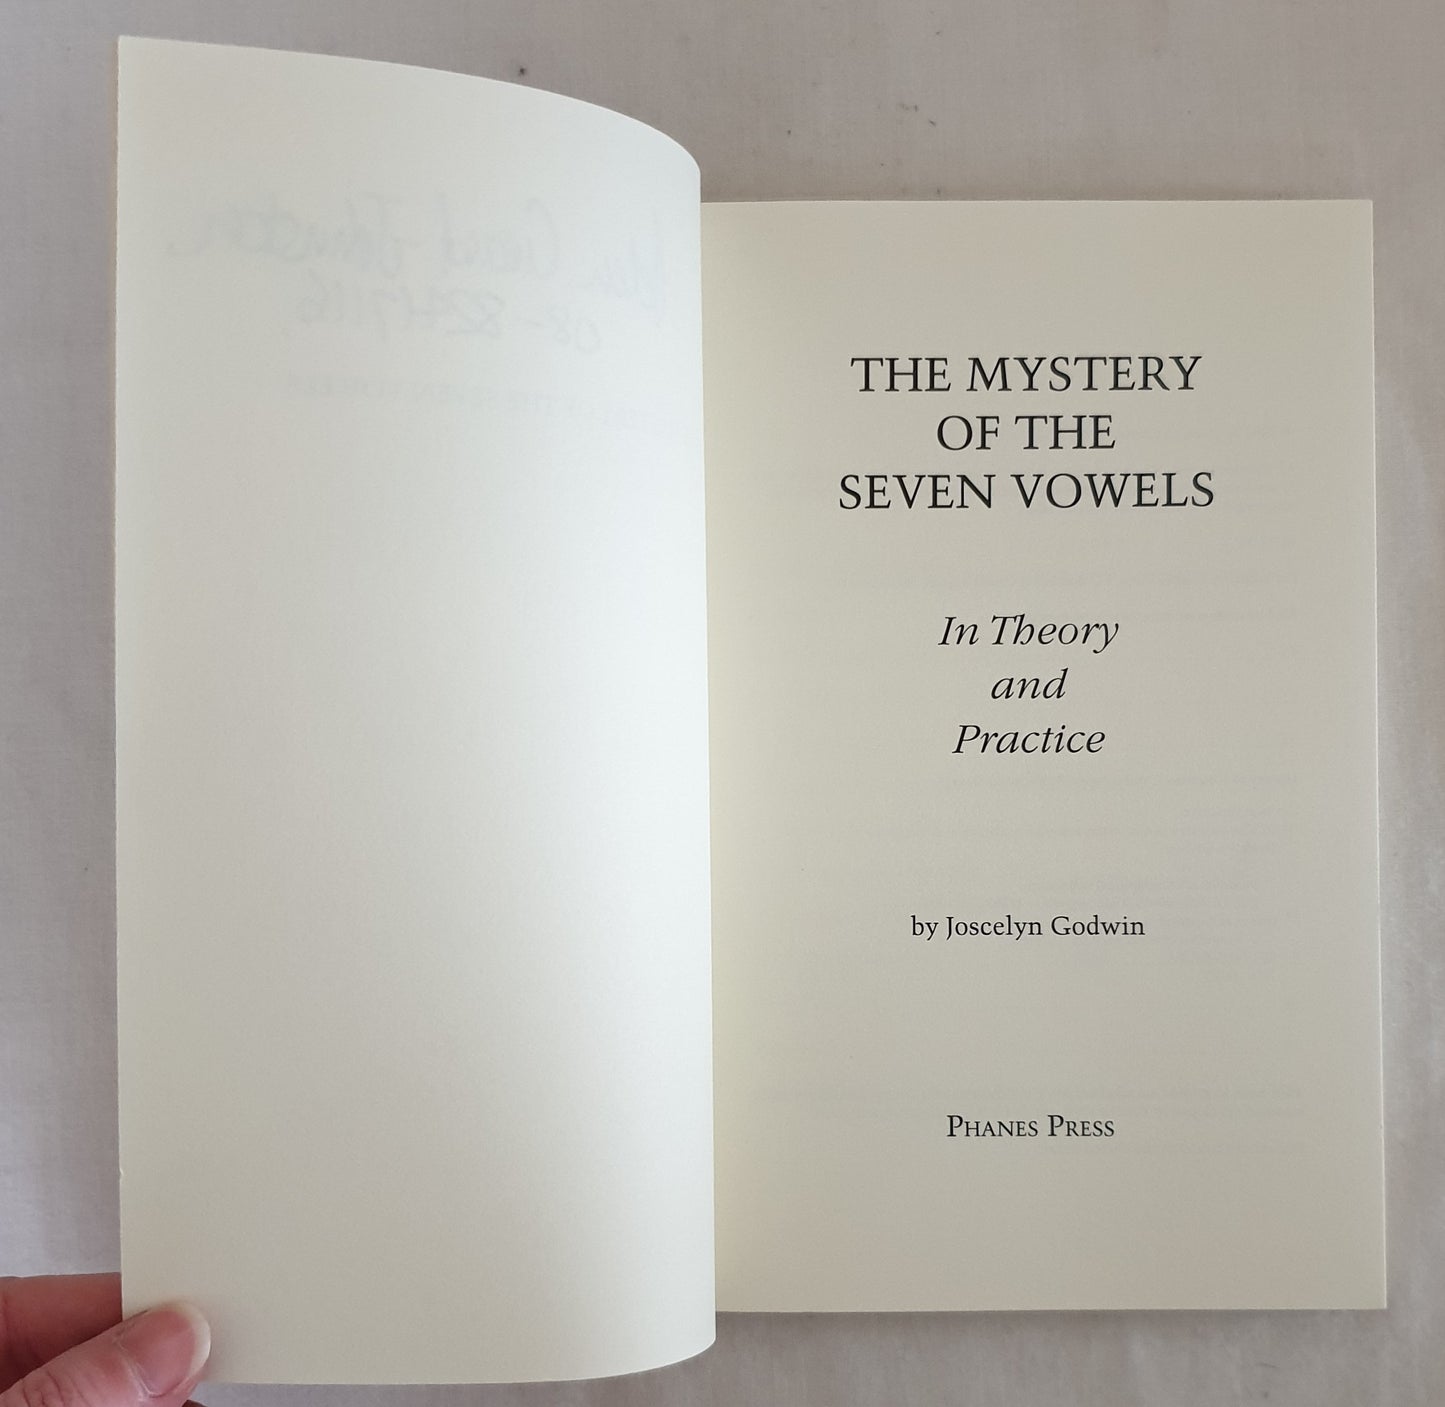 The Mystery of the Seven Vowels by Joscelyn Godwin